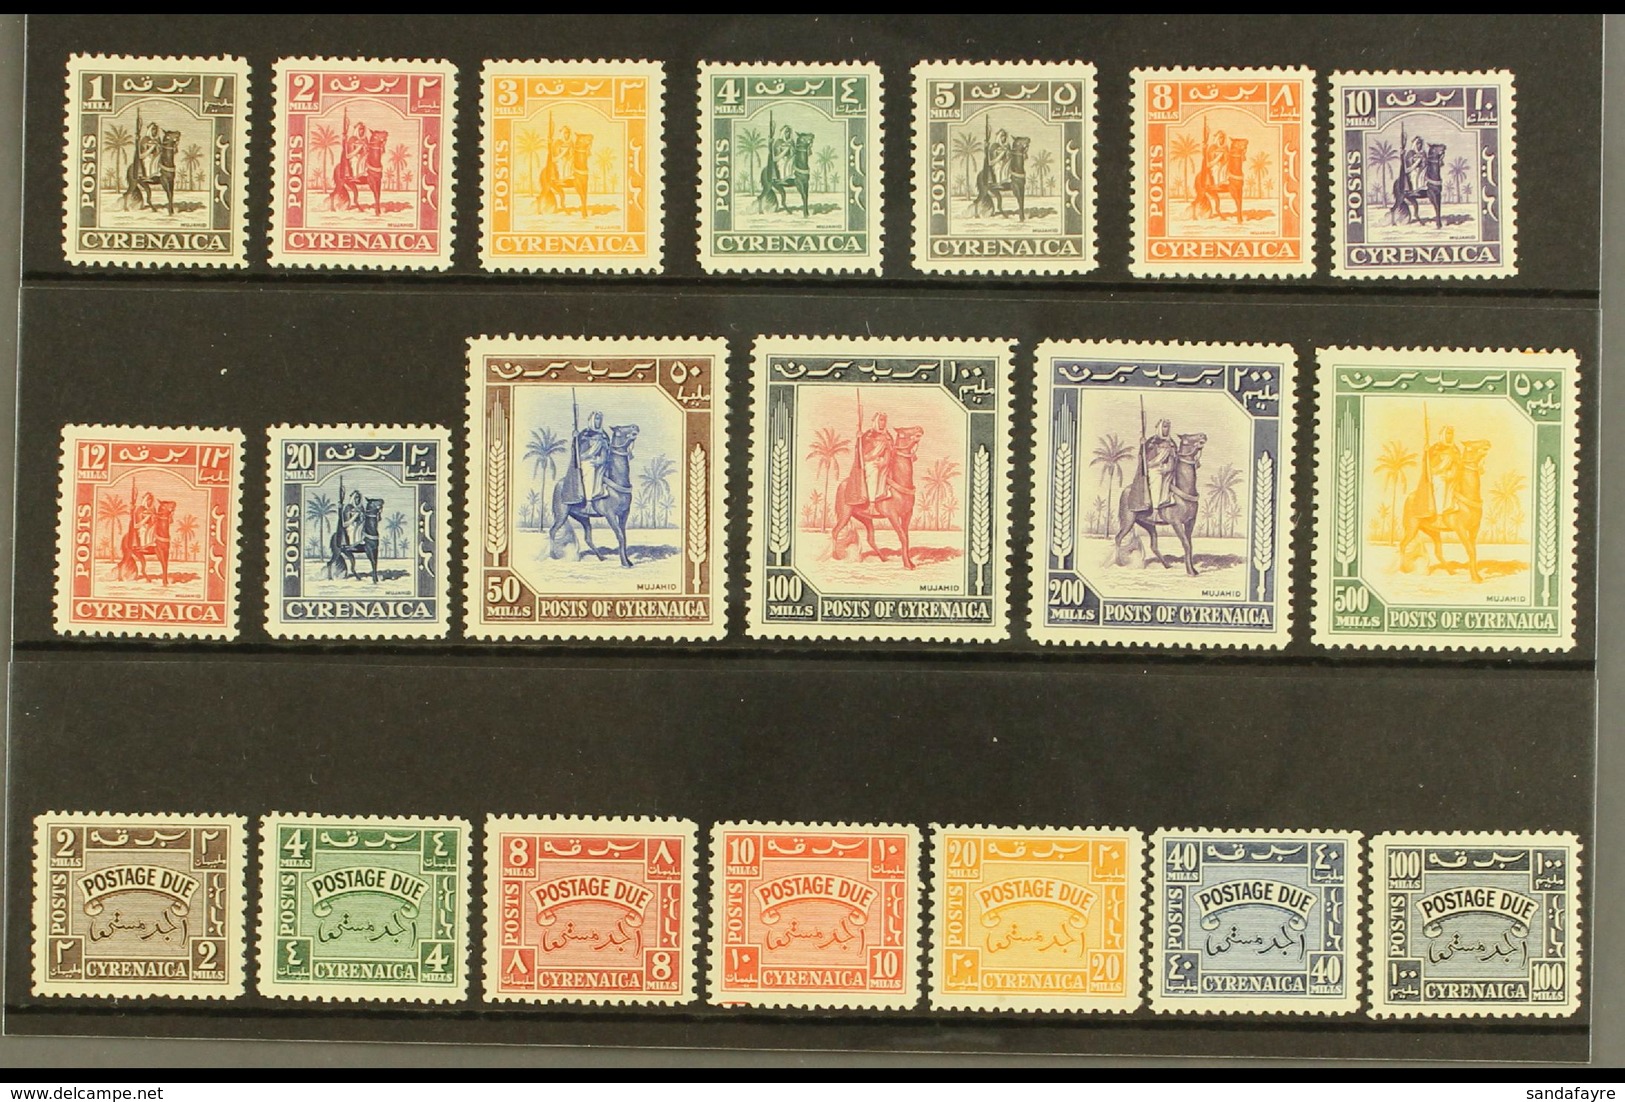 CYRENAICA 1950 Complete Issue Including Horseman Set And Postage Dues, SG 136/48, D149/155, Very Fine And Fresh Mint. (2 - Italiaans Oost-Afrika